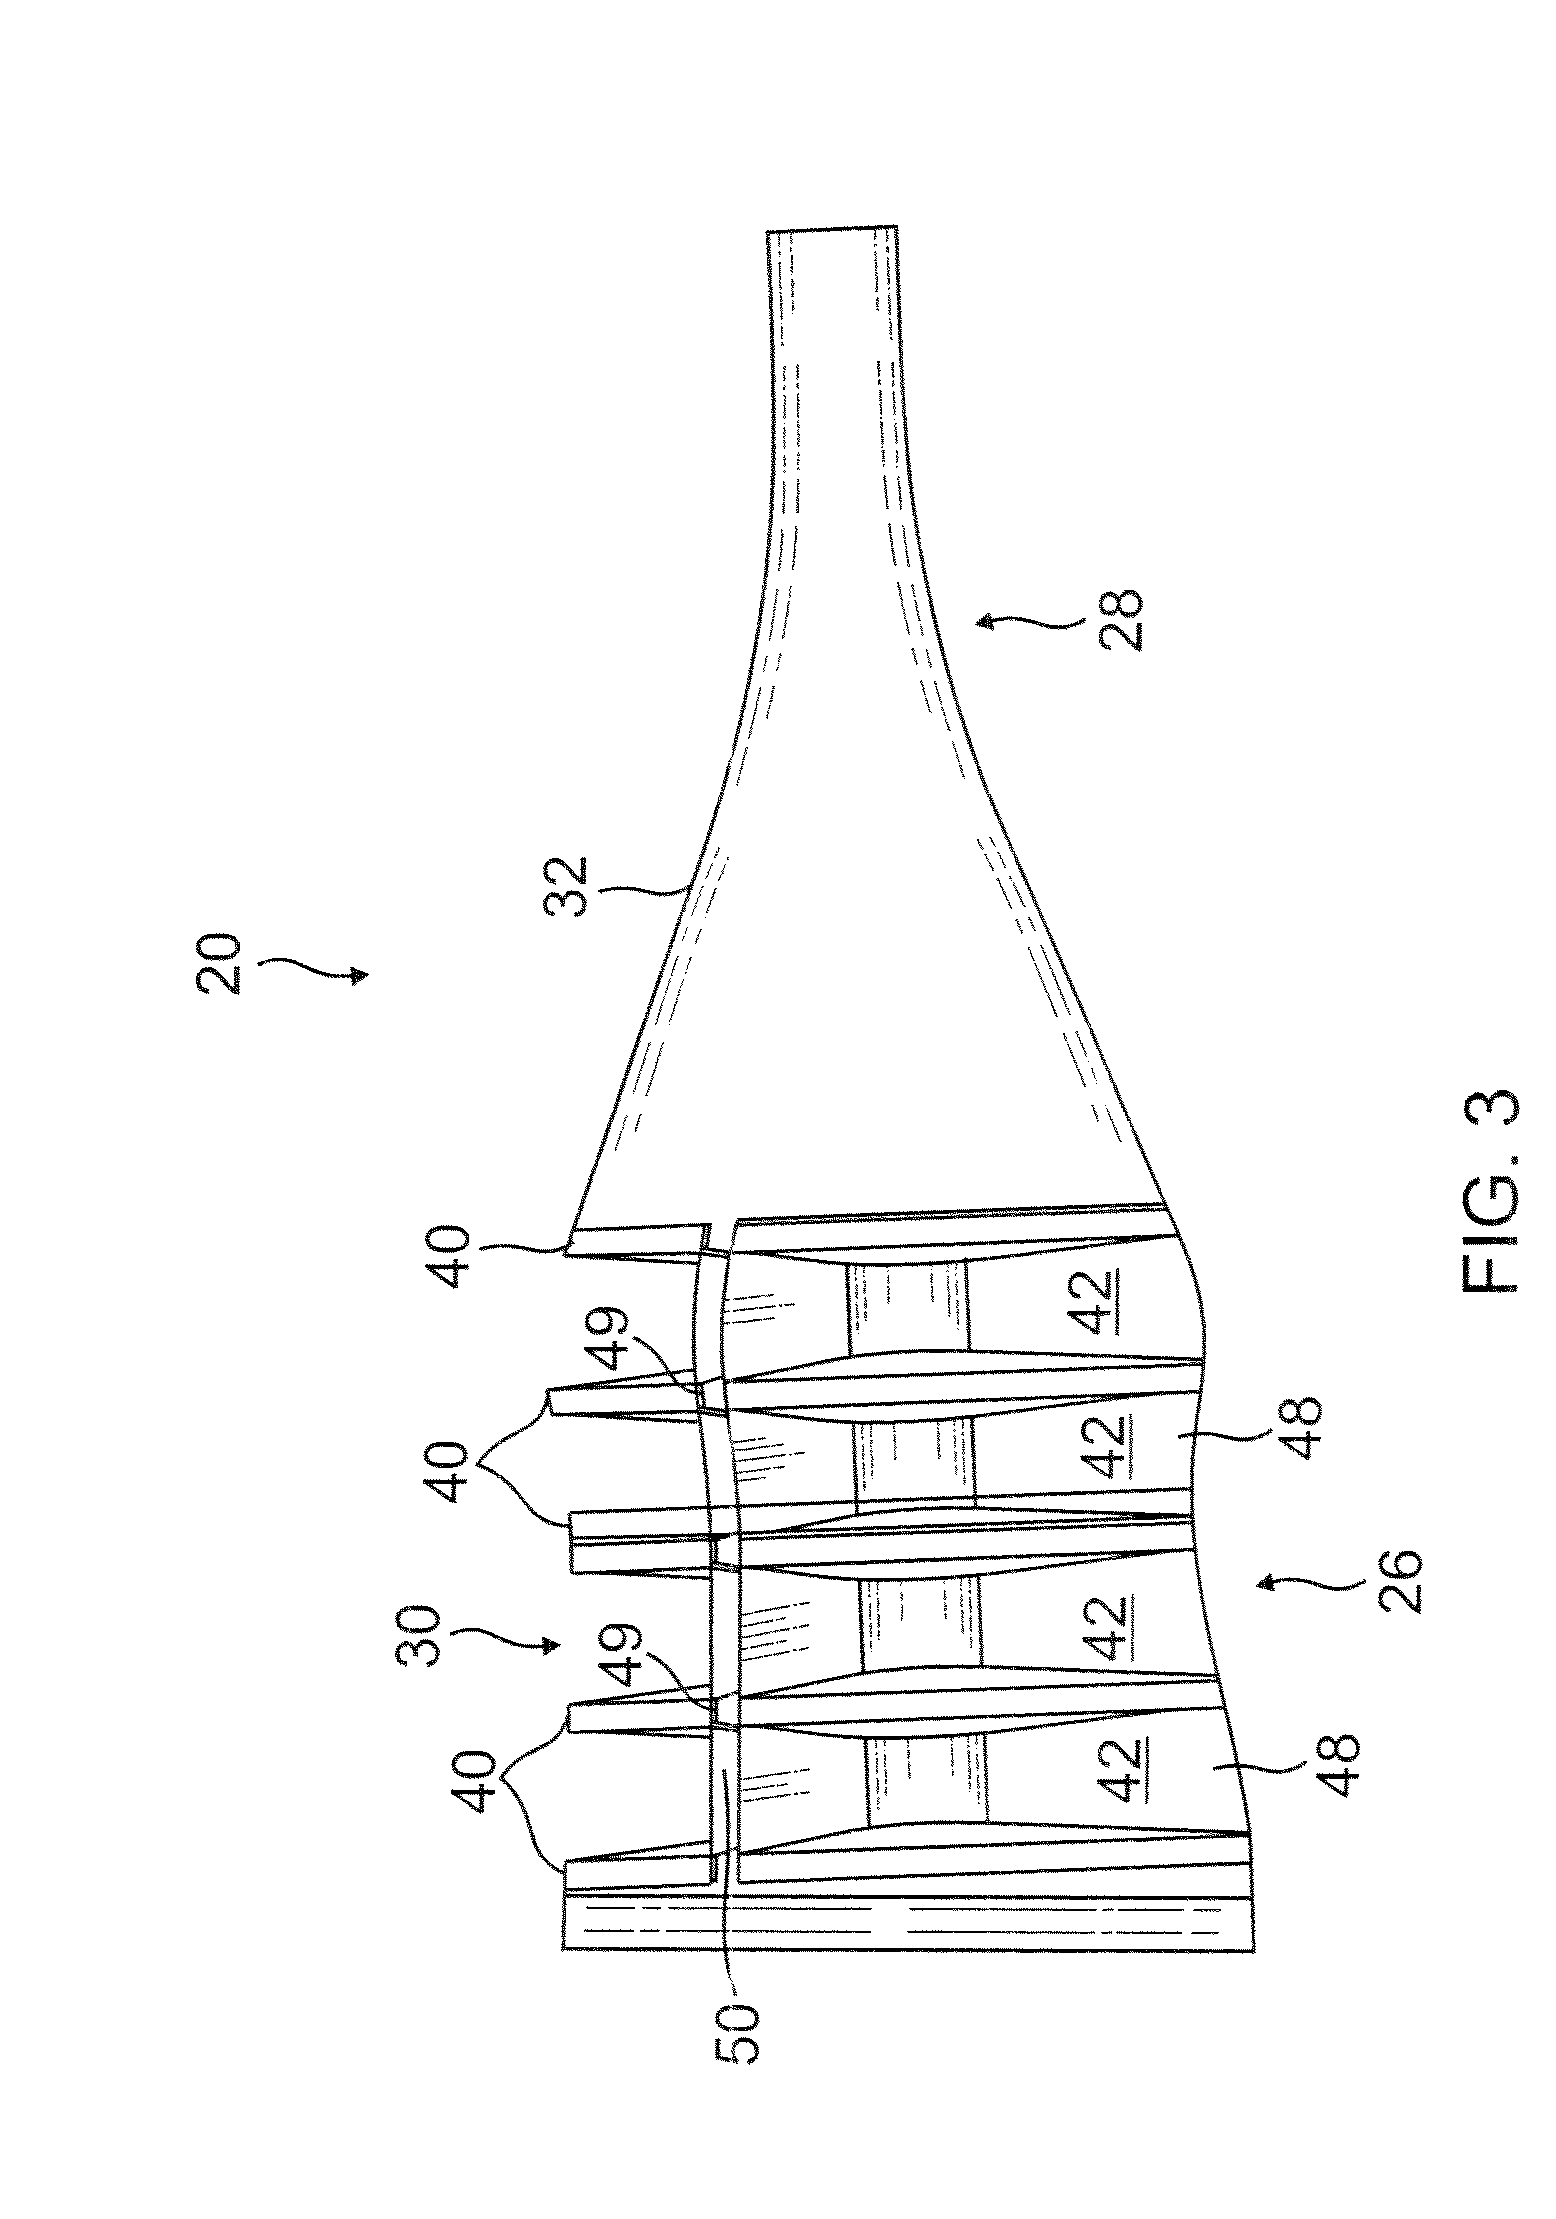 Acoustically treated exhaust centerbody for jet engines and associated methods